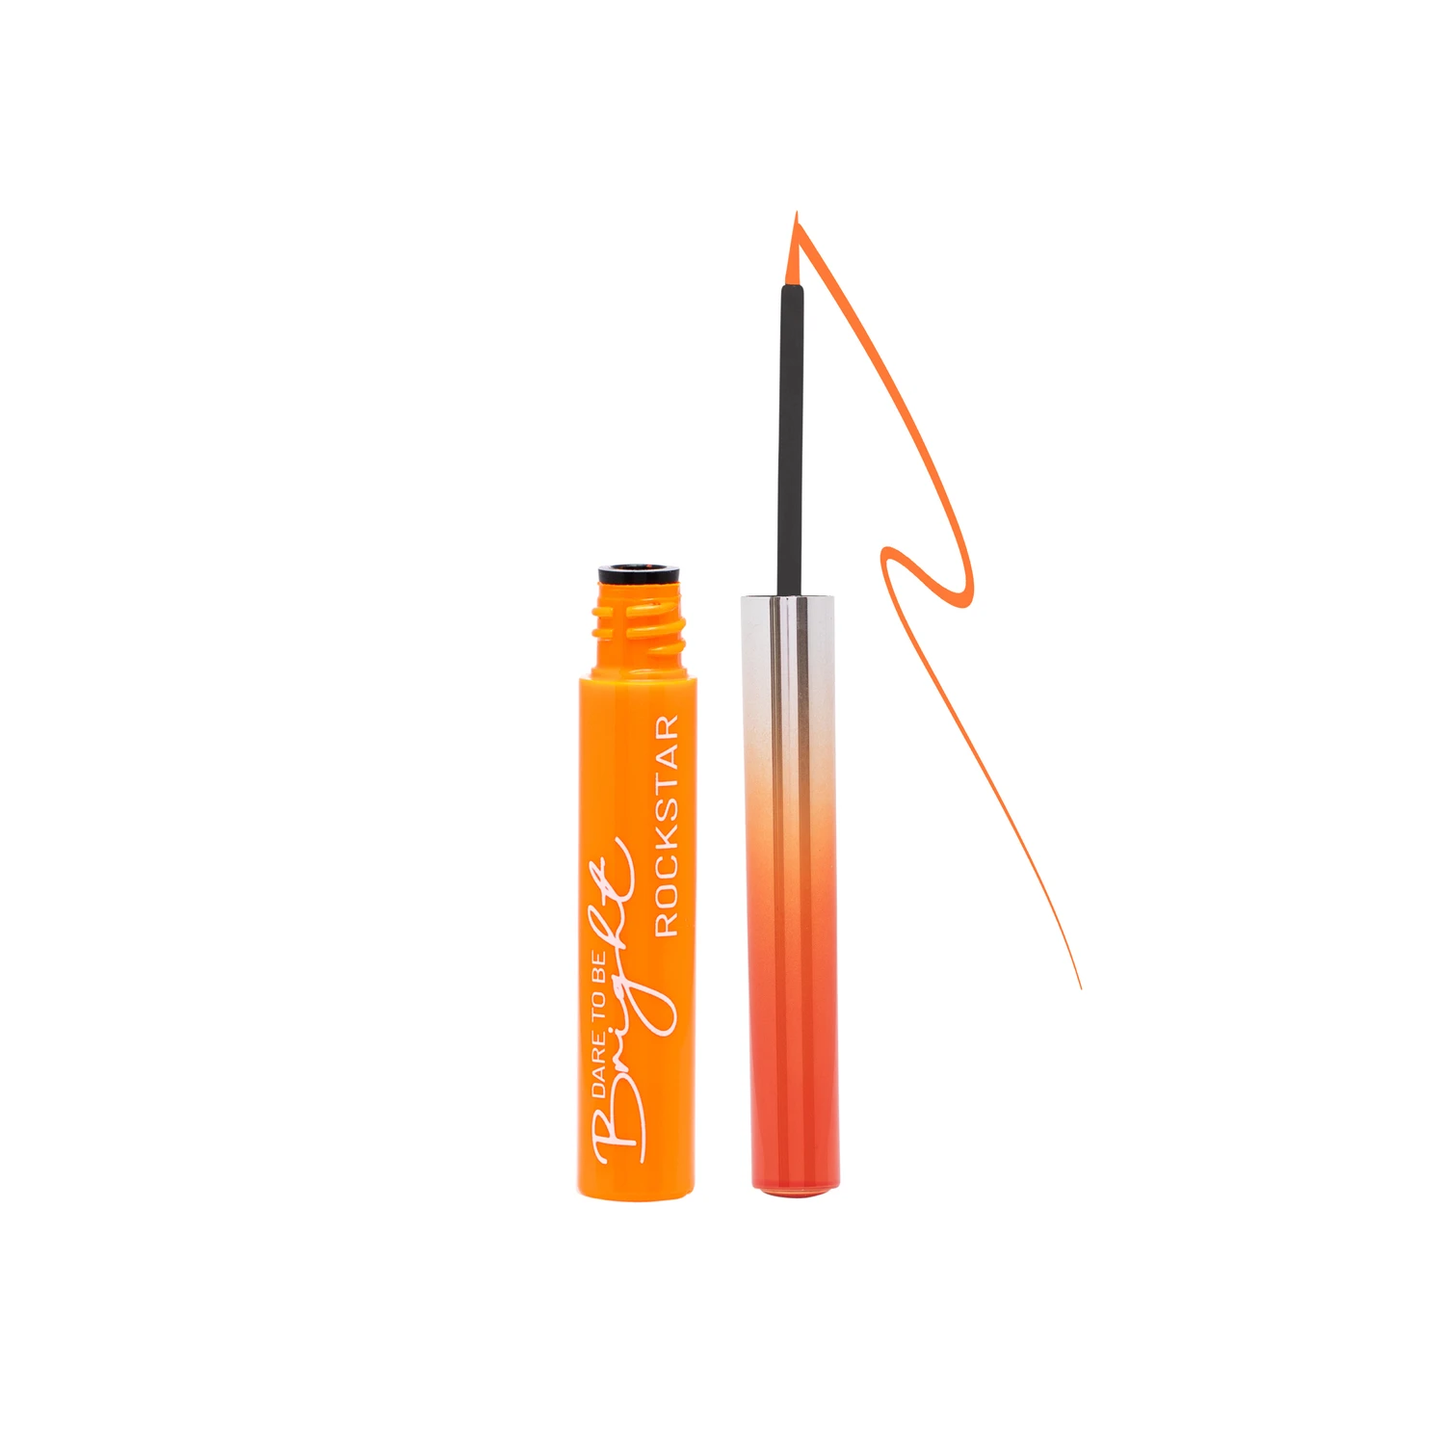 Dare to be Bright Eyeliner